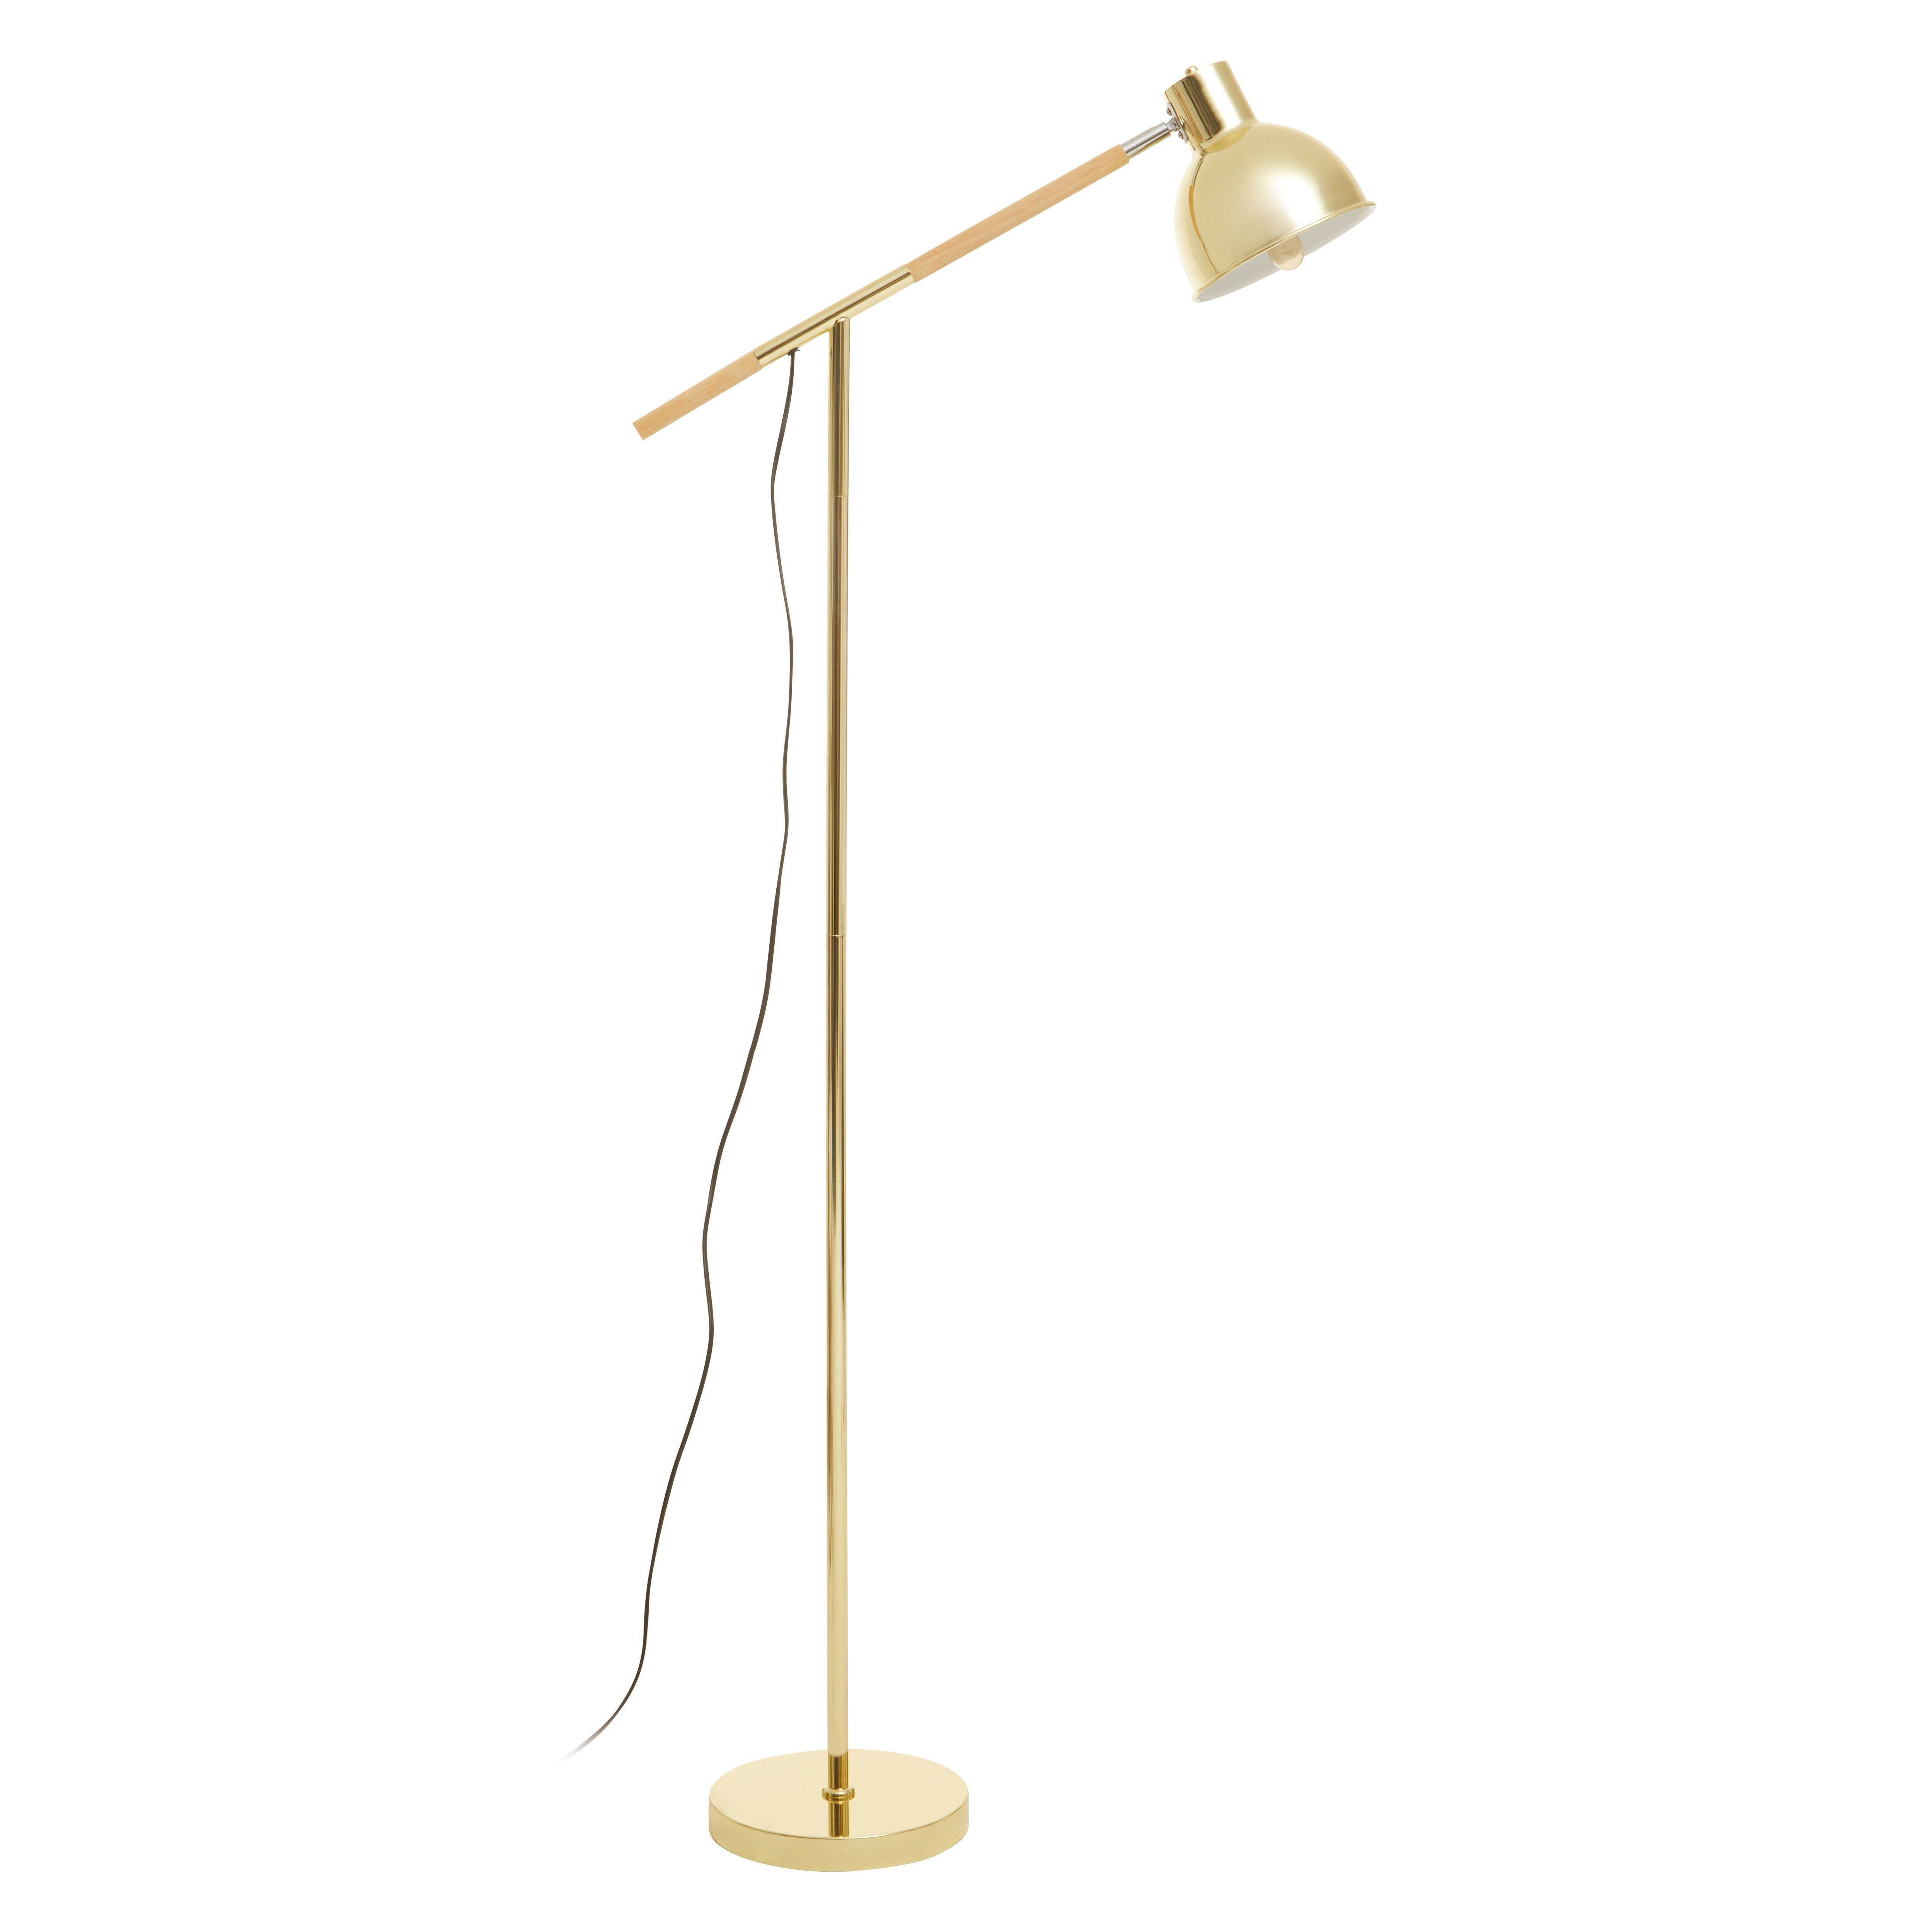 Interiors by Premier Adjustable Rotating Floor Lamp, Convenient Space-Saver - image 1